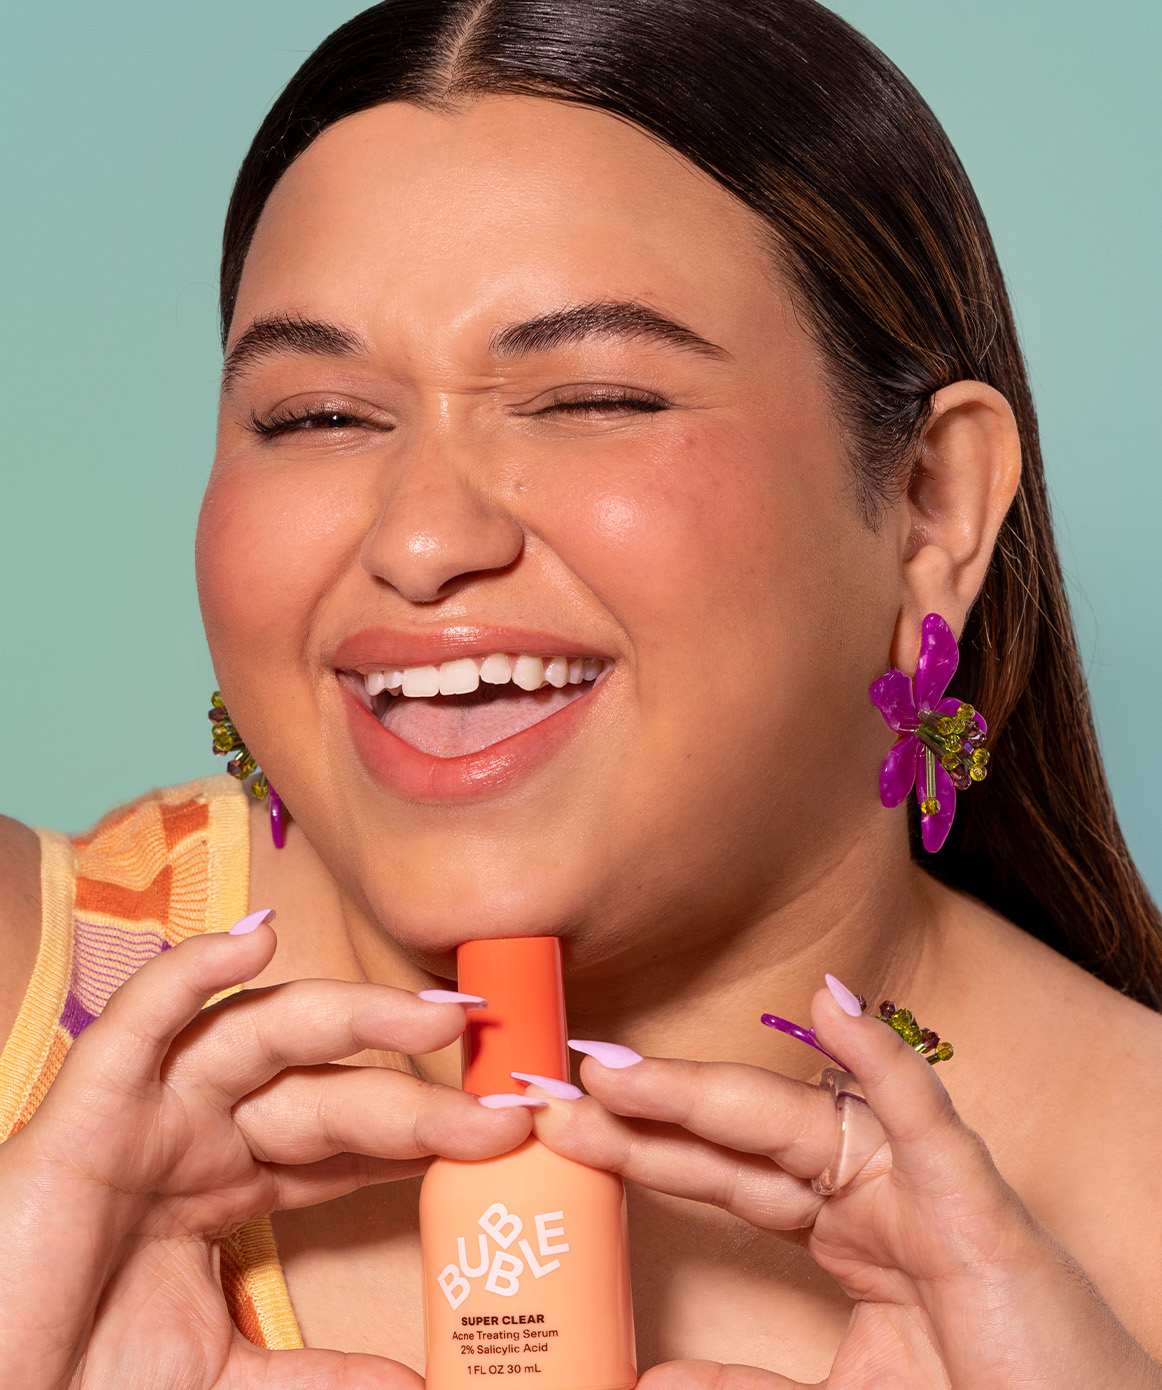 Plus size hispanic woman holding an anti-acne serum. Skin care treatment for blemishes, whiteheads, cystic zits, pimples and breakouts.